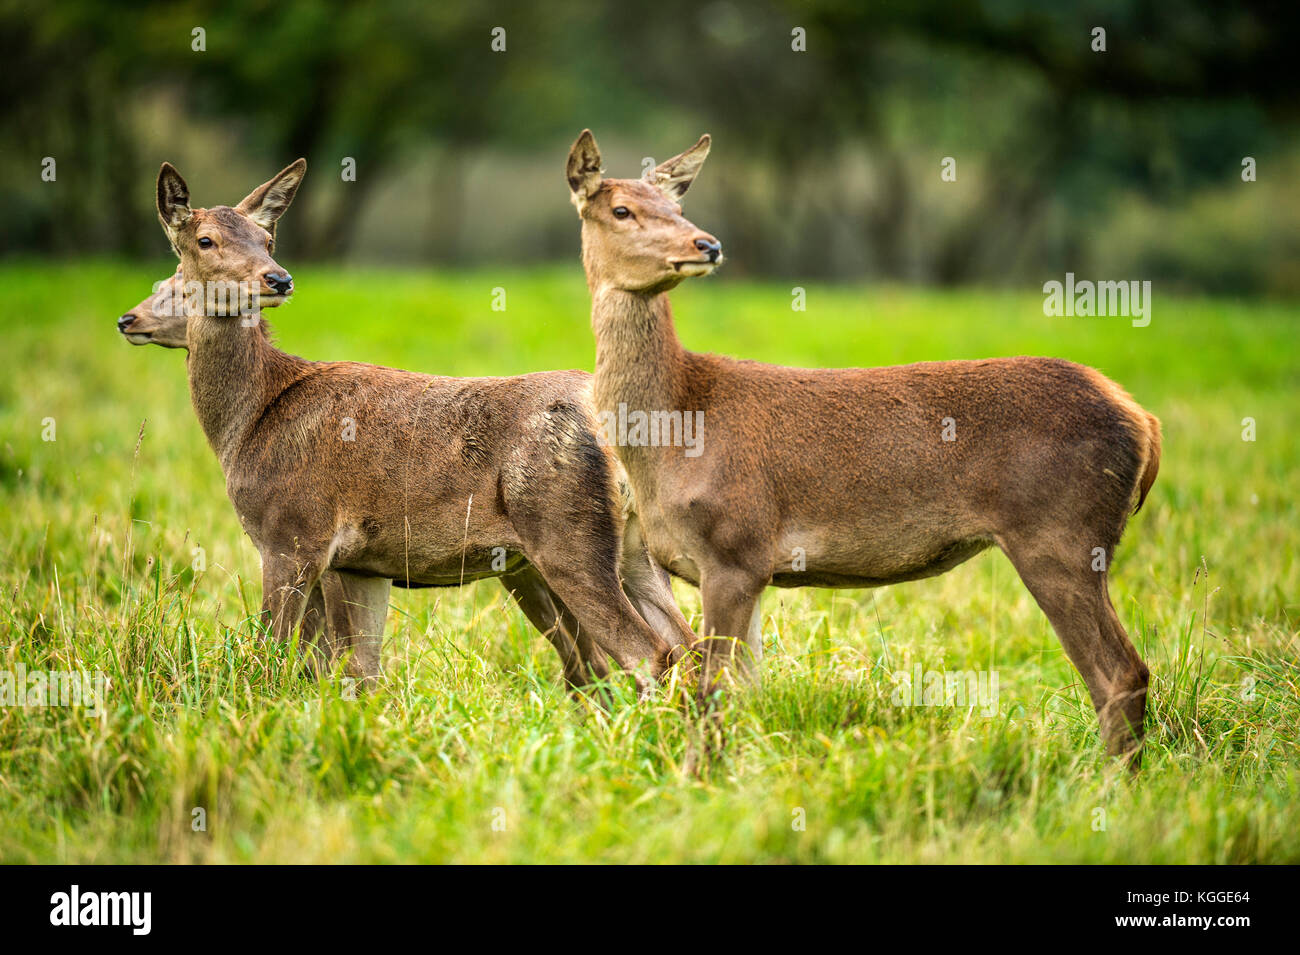 Autumn Red Deer Rut.Image sequence depicting scenes around male Stag's and Female Hind's with young at rest and battling during the annual autumn rut. Stock Photo